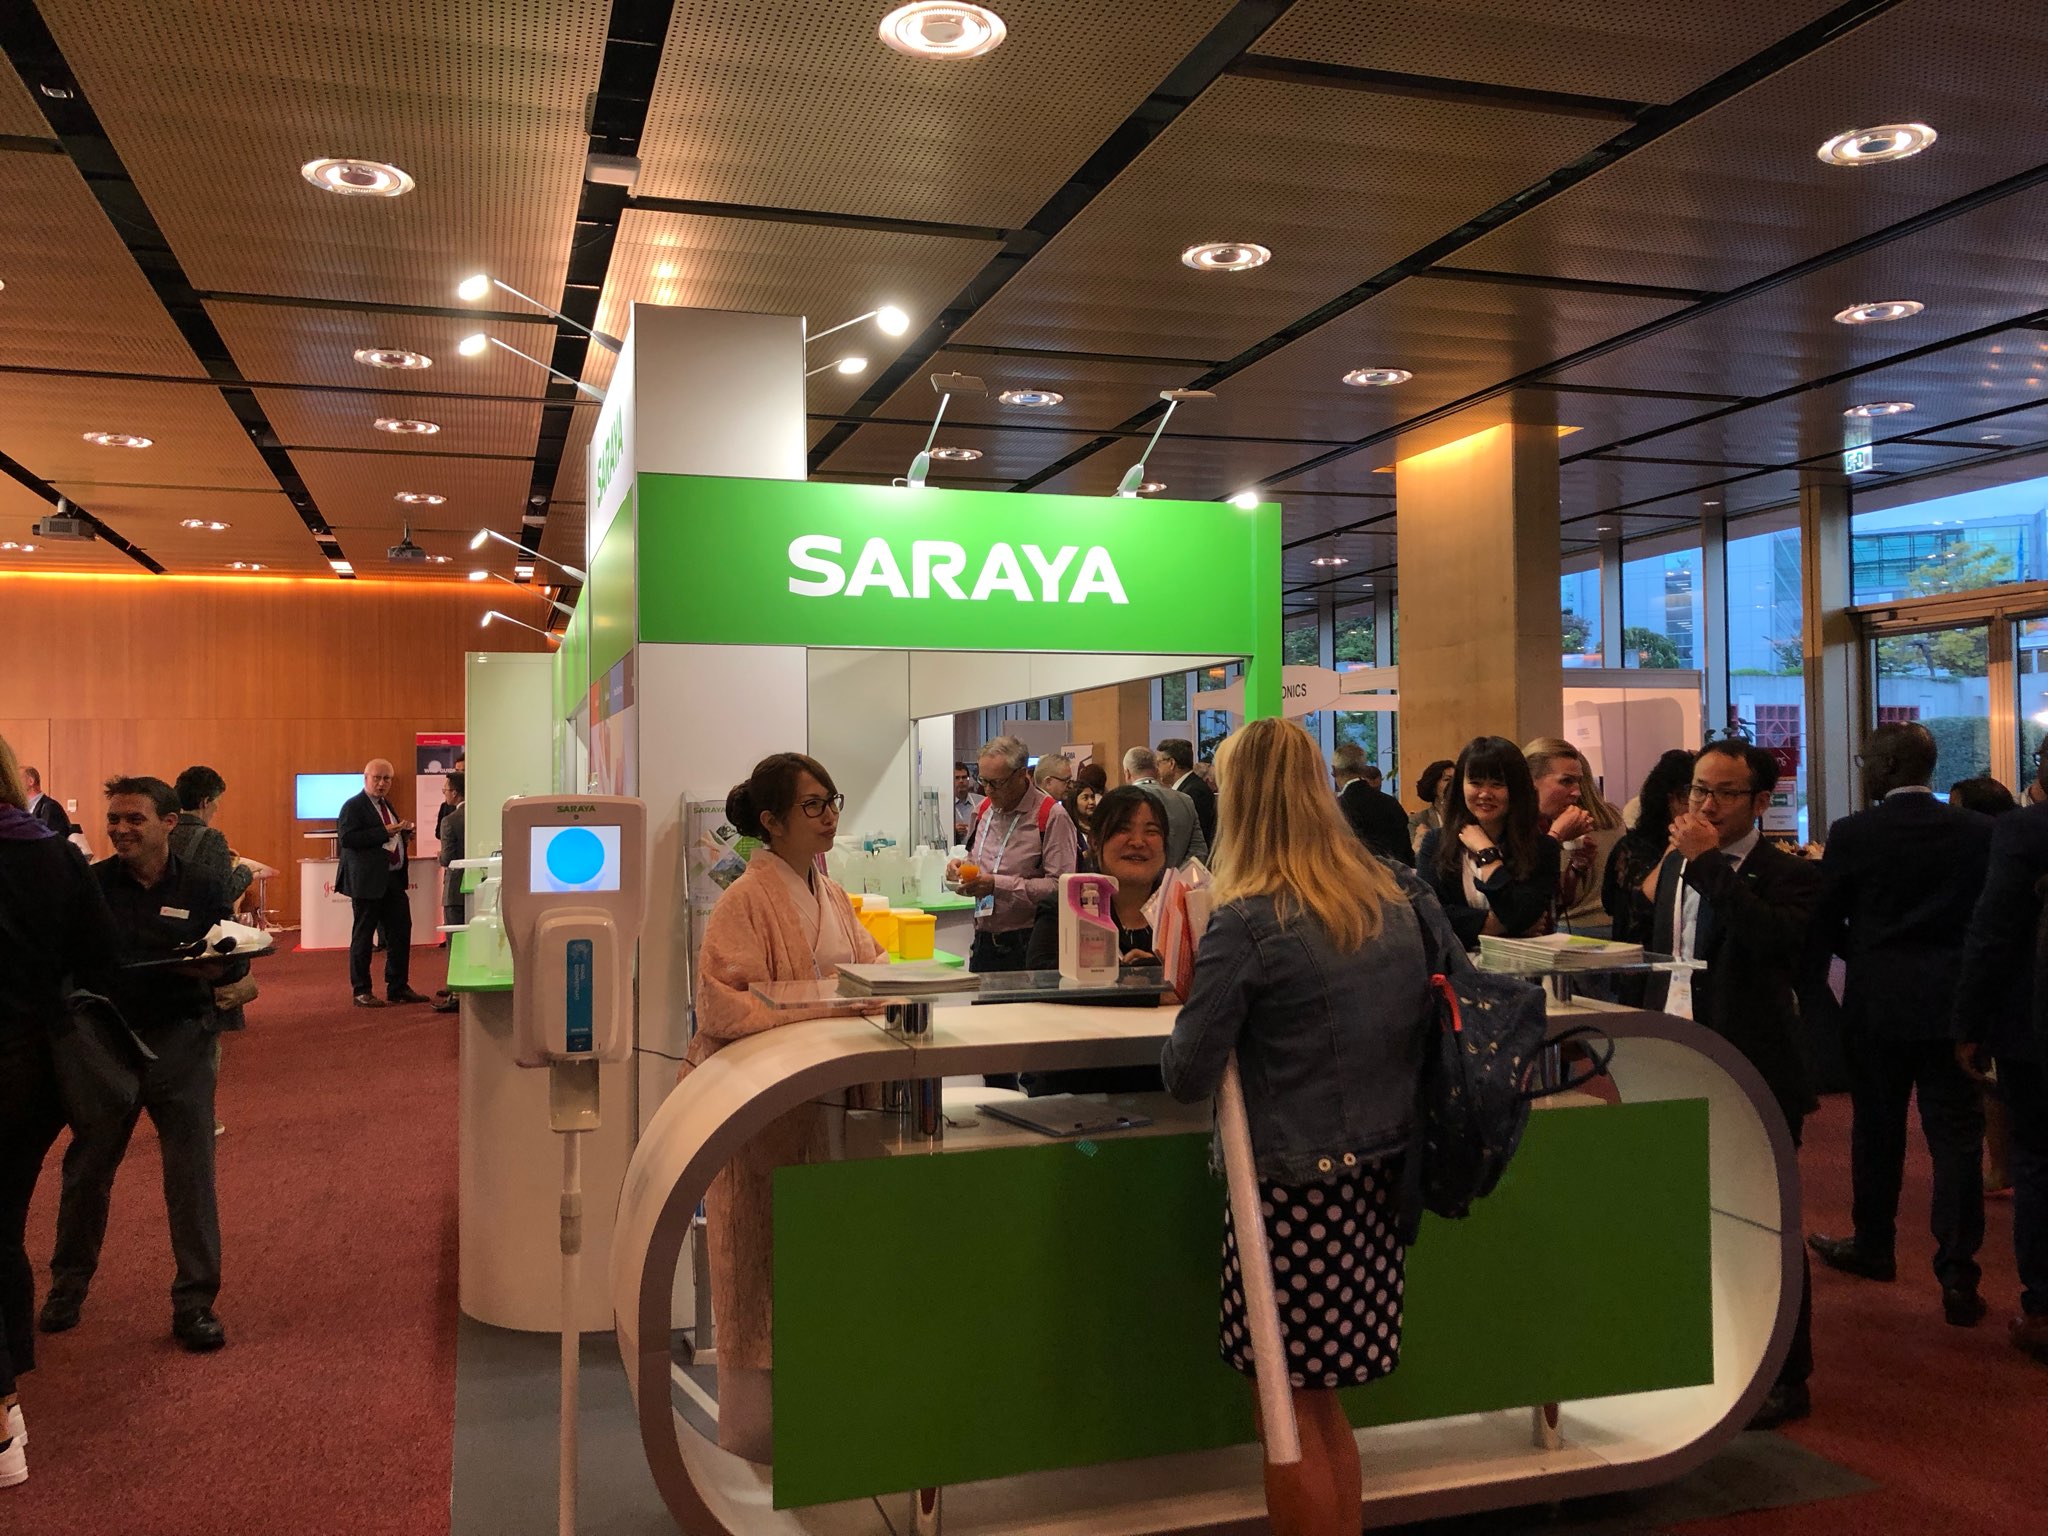 Thank you for visiting us at the SARAYA booth during ICPIC 2019, held in Geneva, Switzerland from the 10th to the 13th of September.